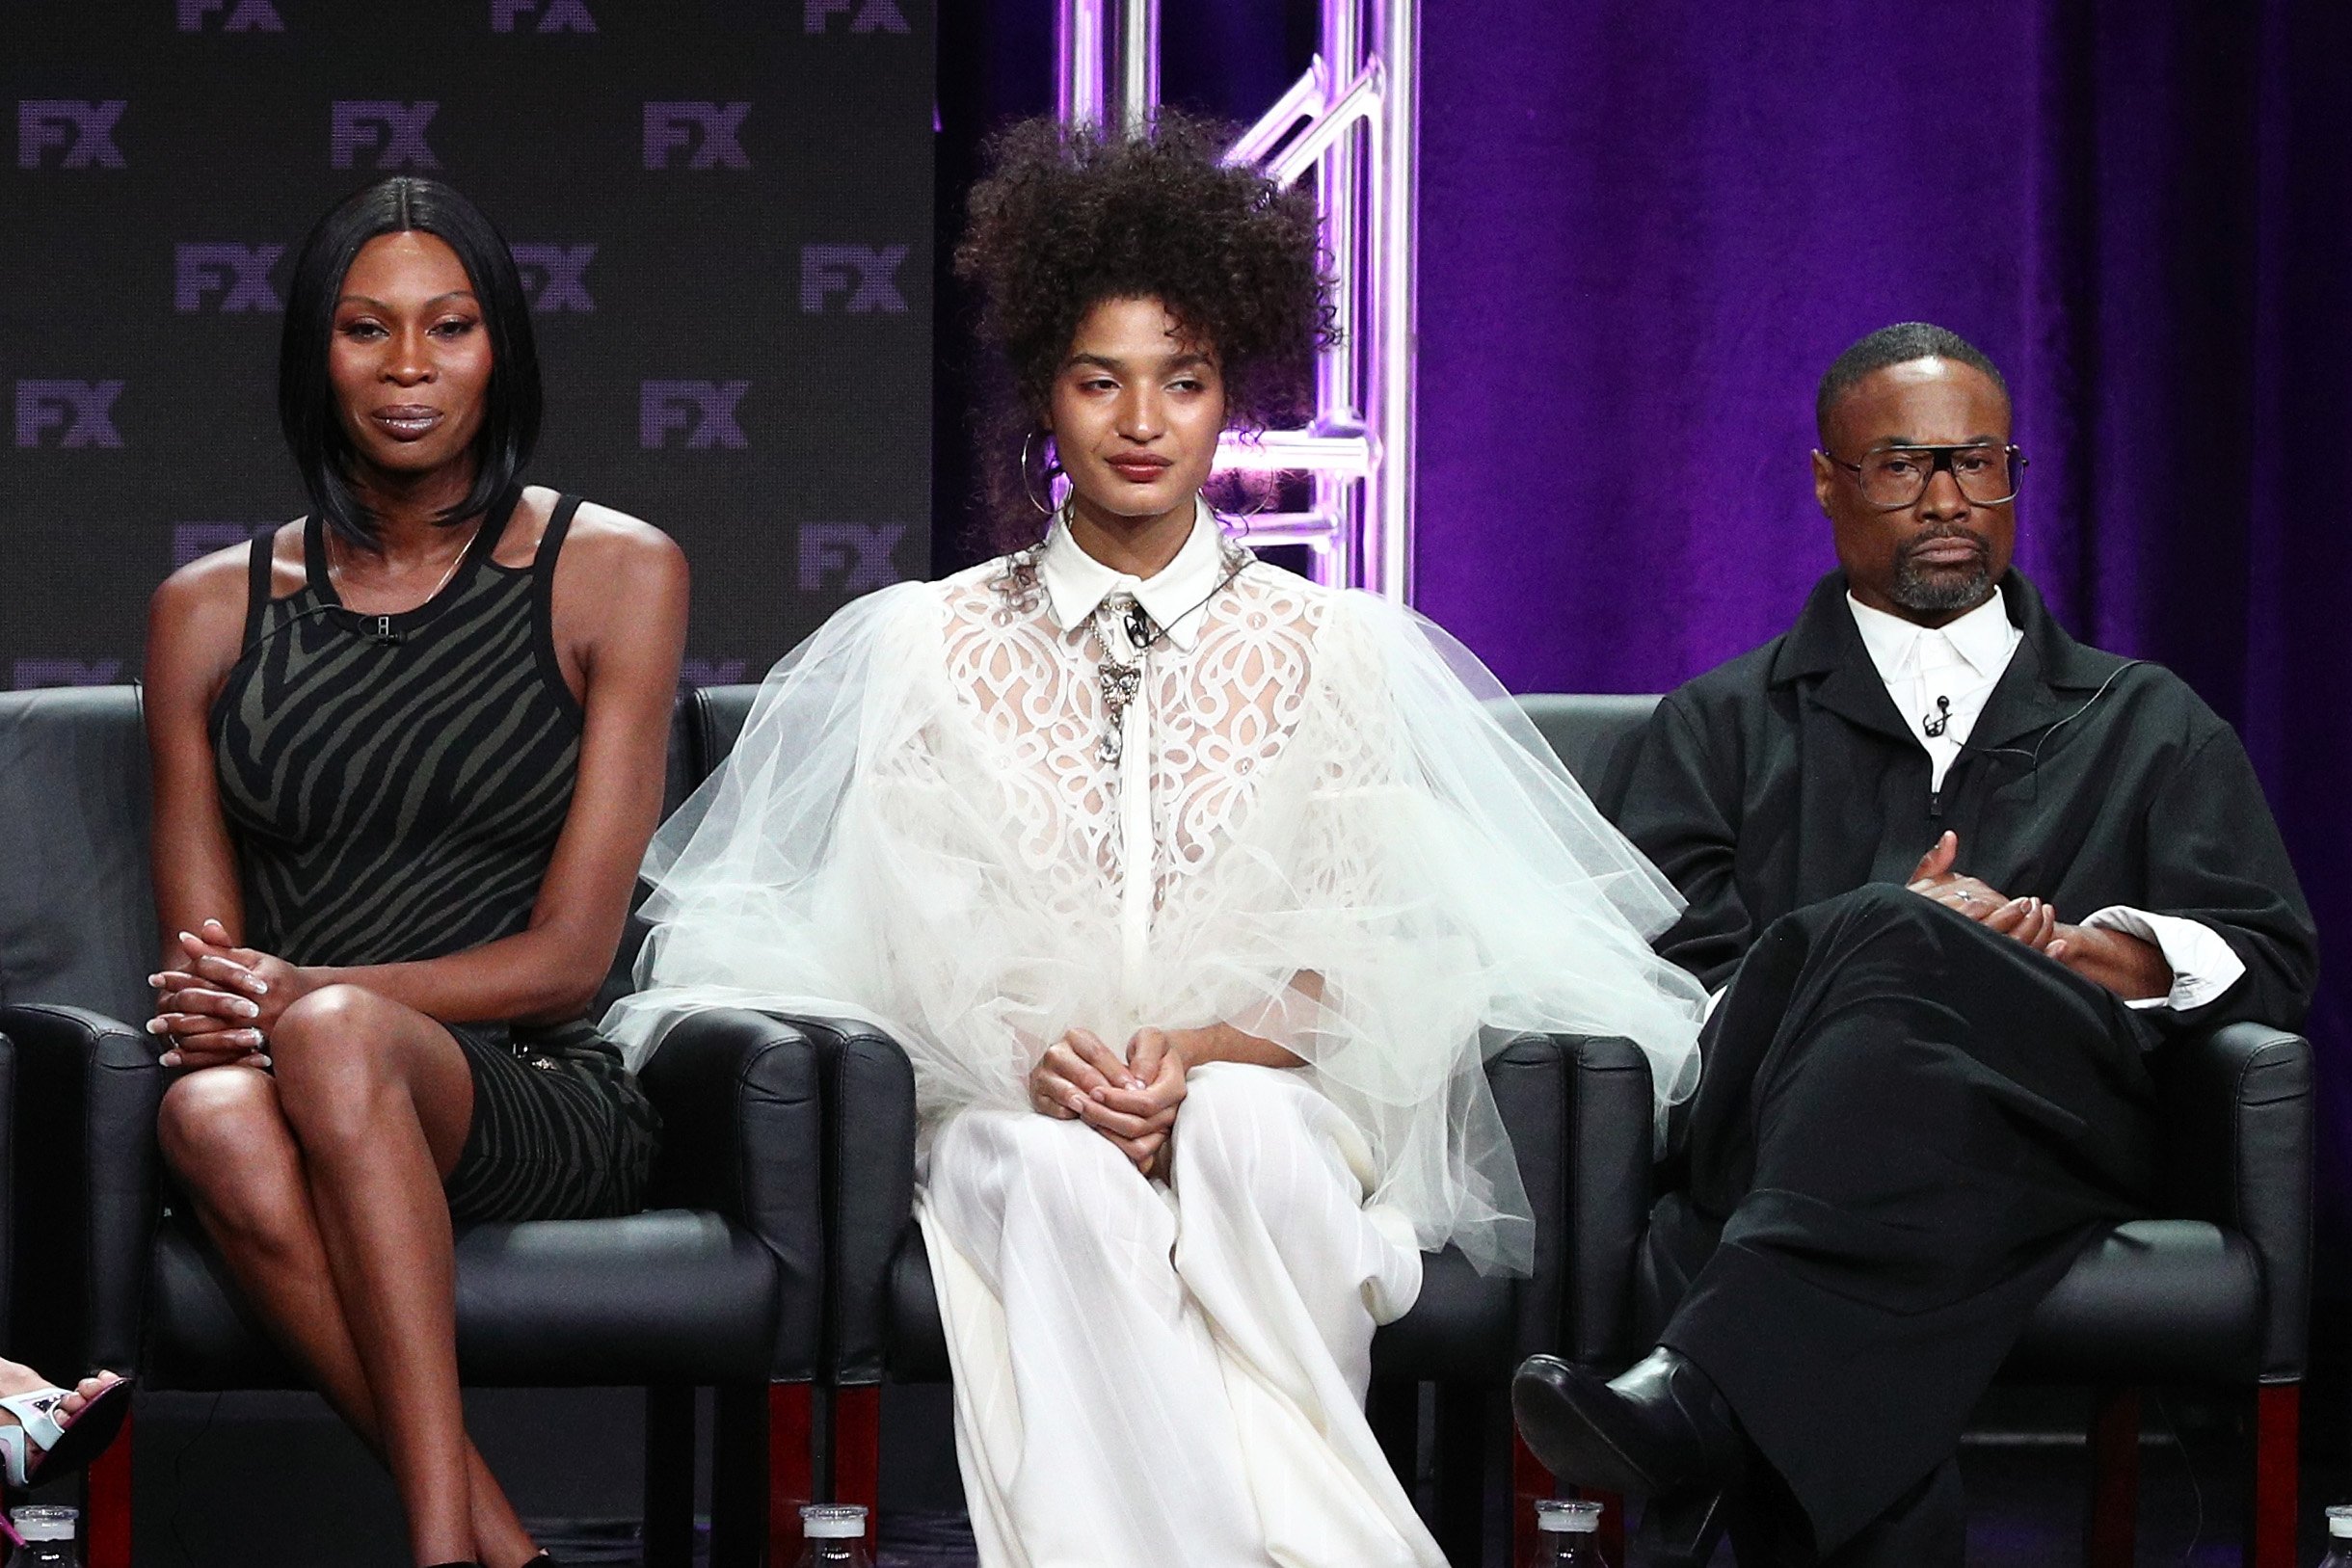 Actors Dominique Jackson in a black outfit, Indya Moore in white, and Billy Porter in a suit speak on stage at the 'Pose' panel